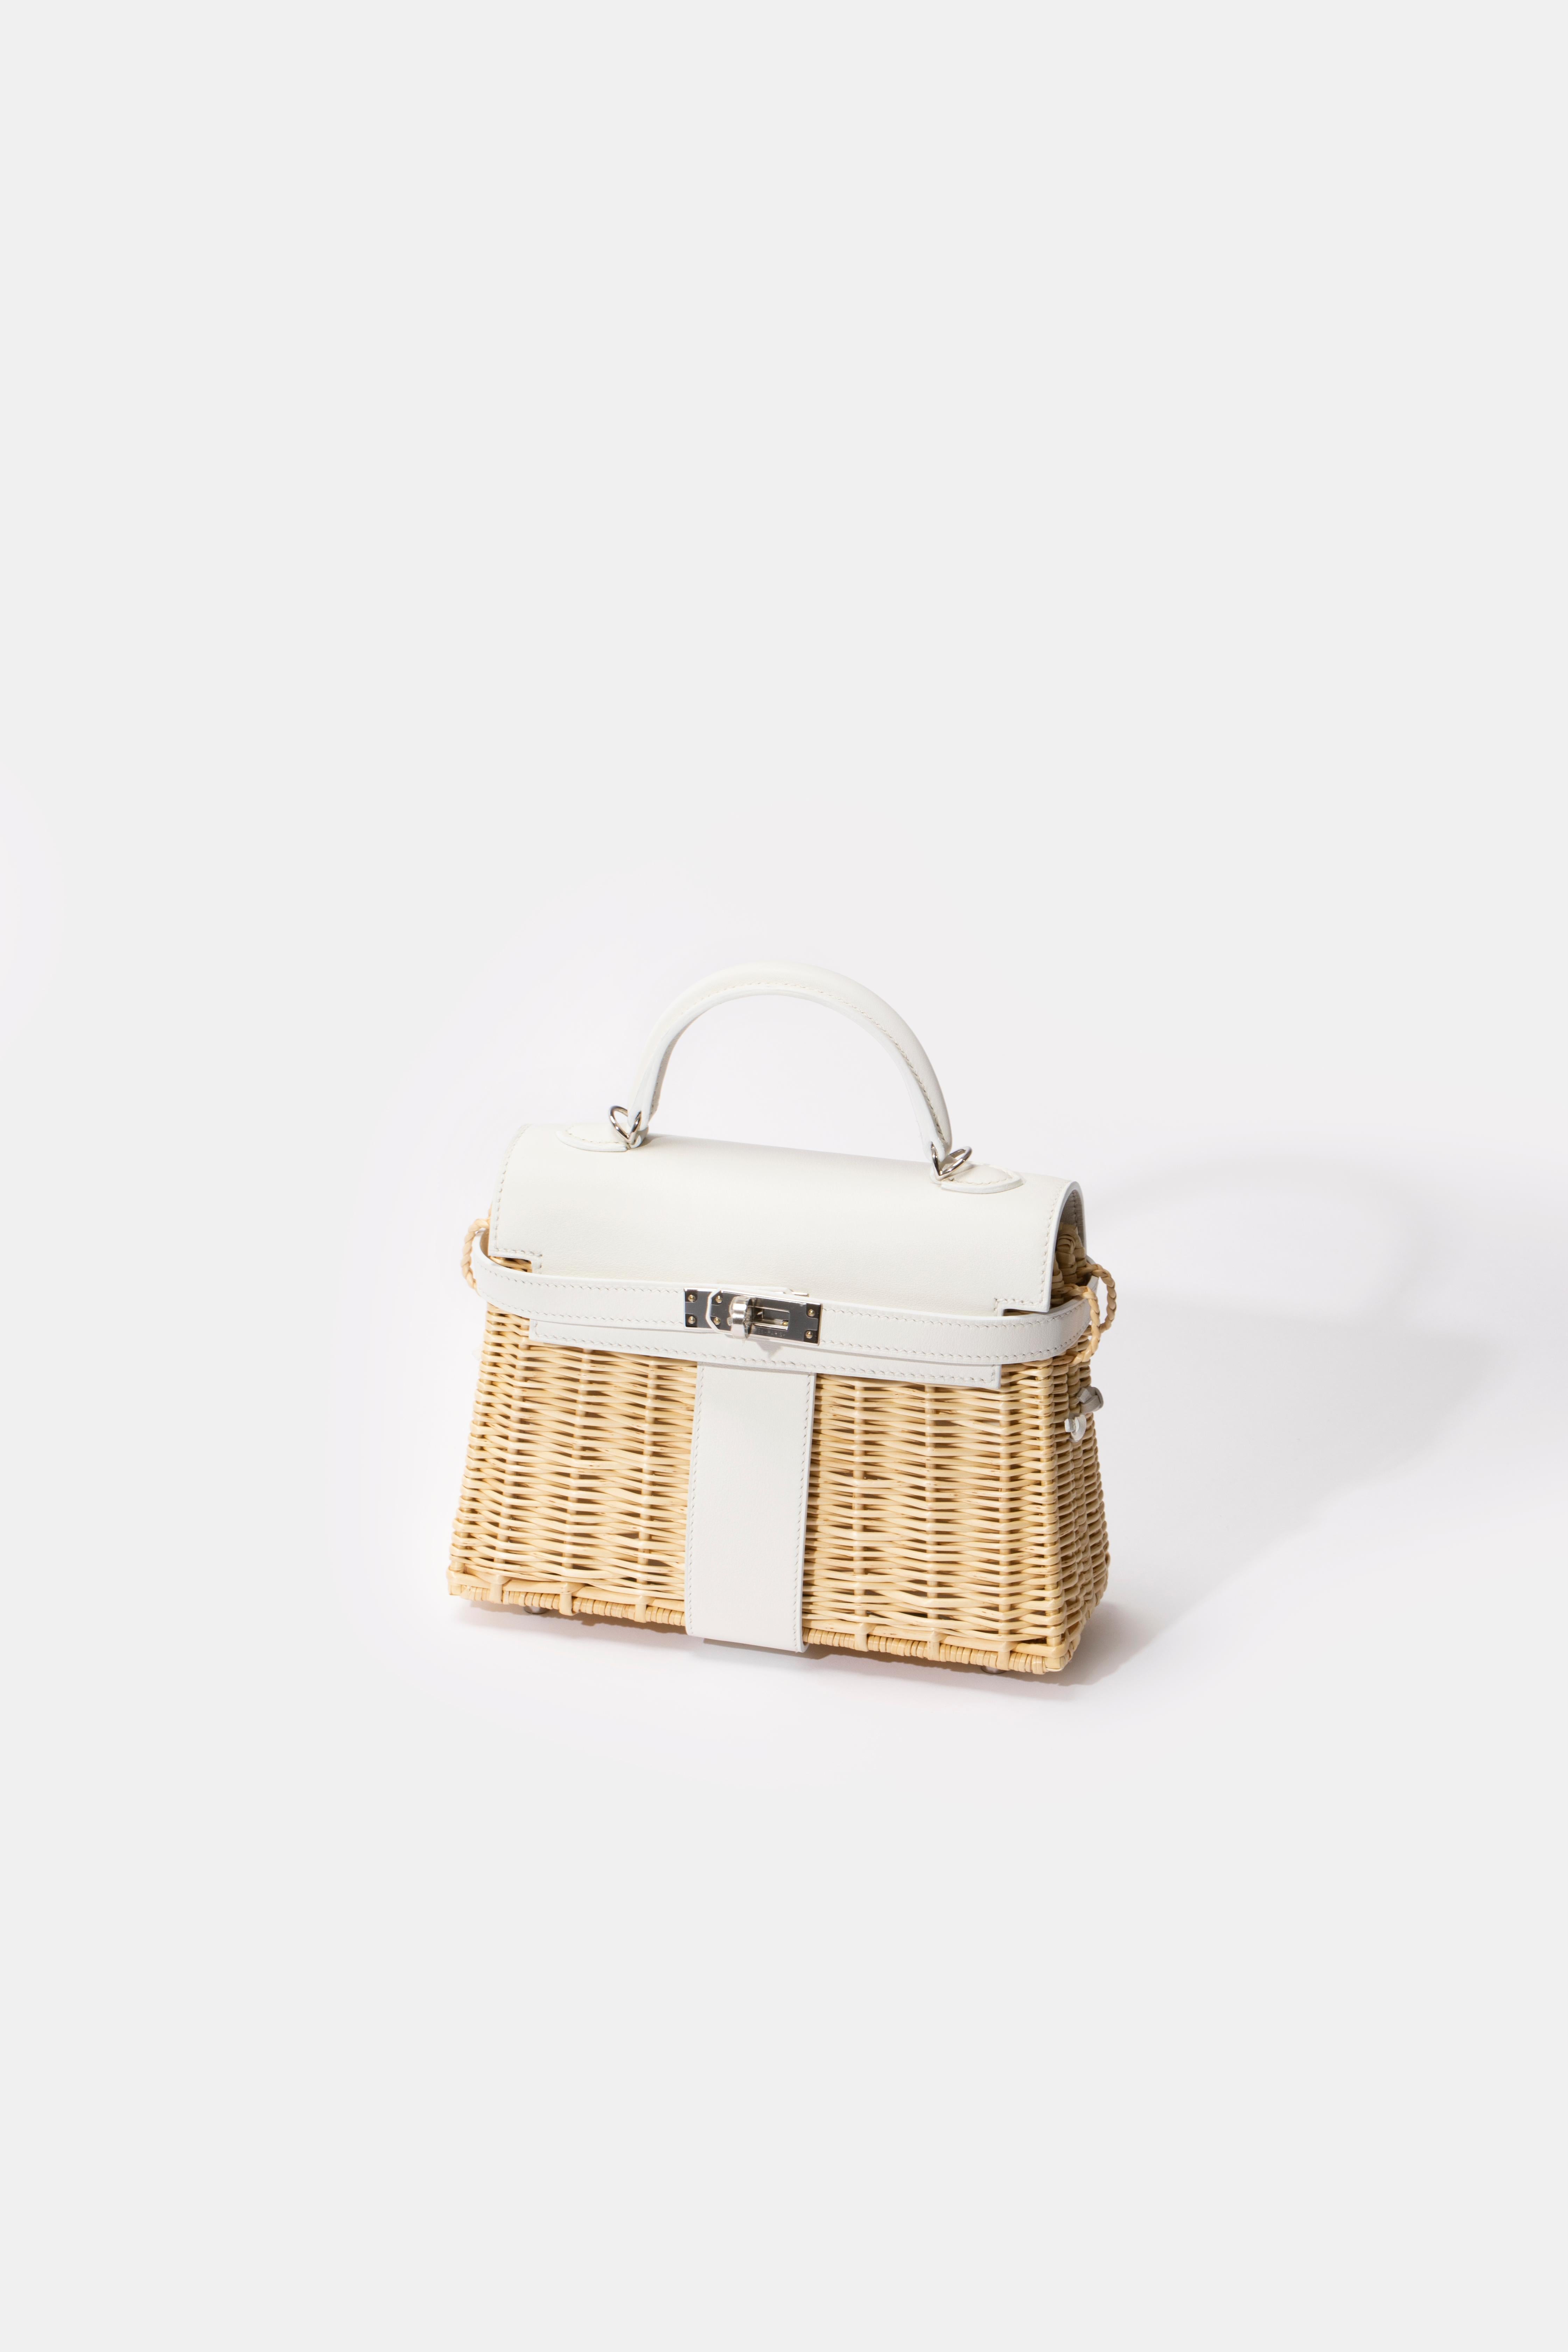 1stdibs Exclusives From Three Over Six

Brand: Hermès 
Style: Kelly
Size: Mini Picnic 
Color: White
Leather: Swift and Wicker 
Hardware: Palladium
Stamp: 2020 Y

Condition: Pristine, never carried: The item has never been carried and is in pristine